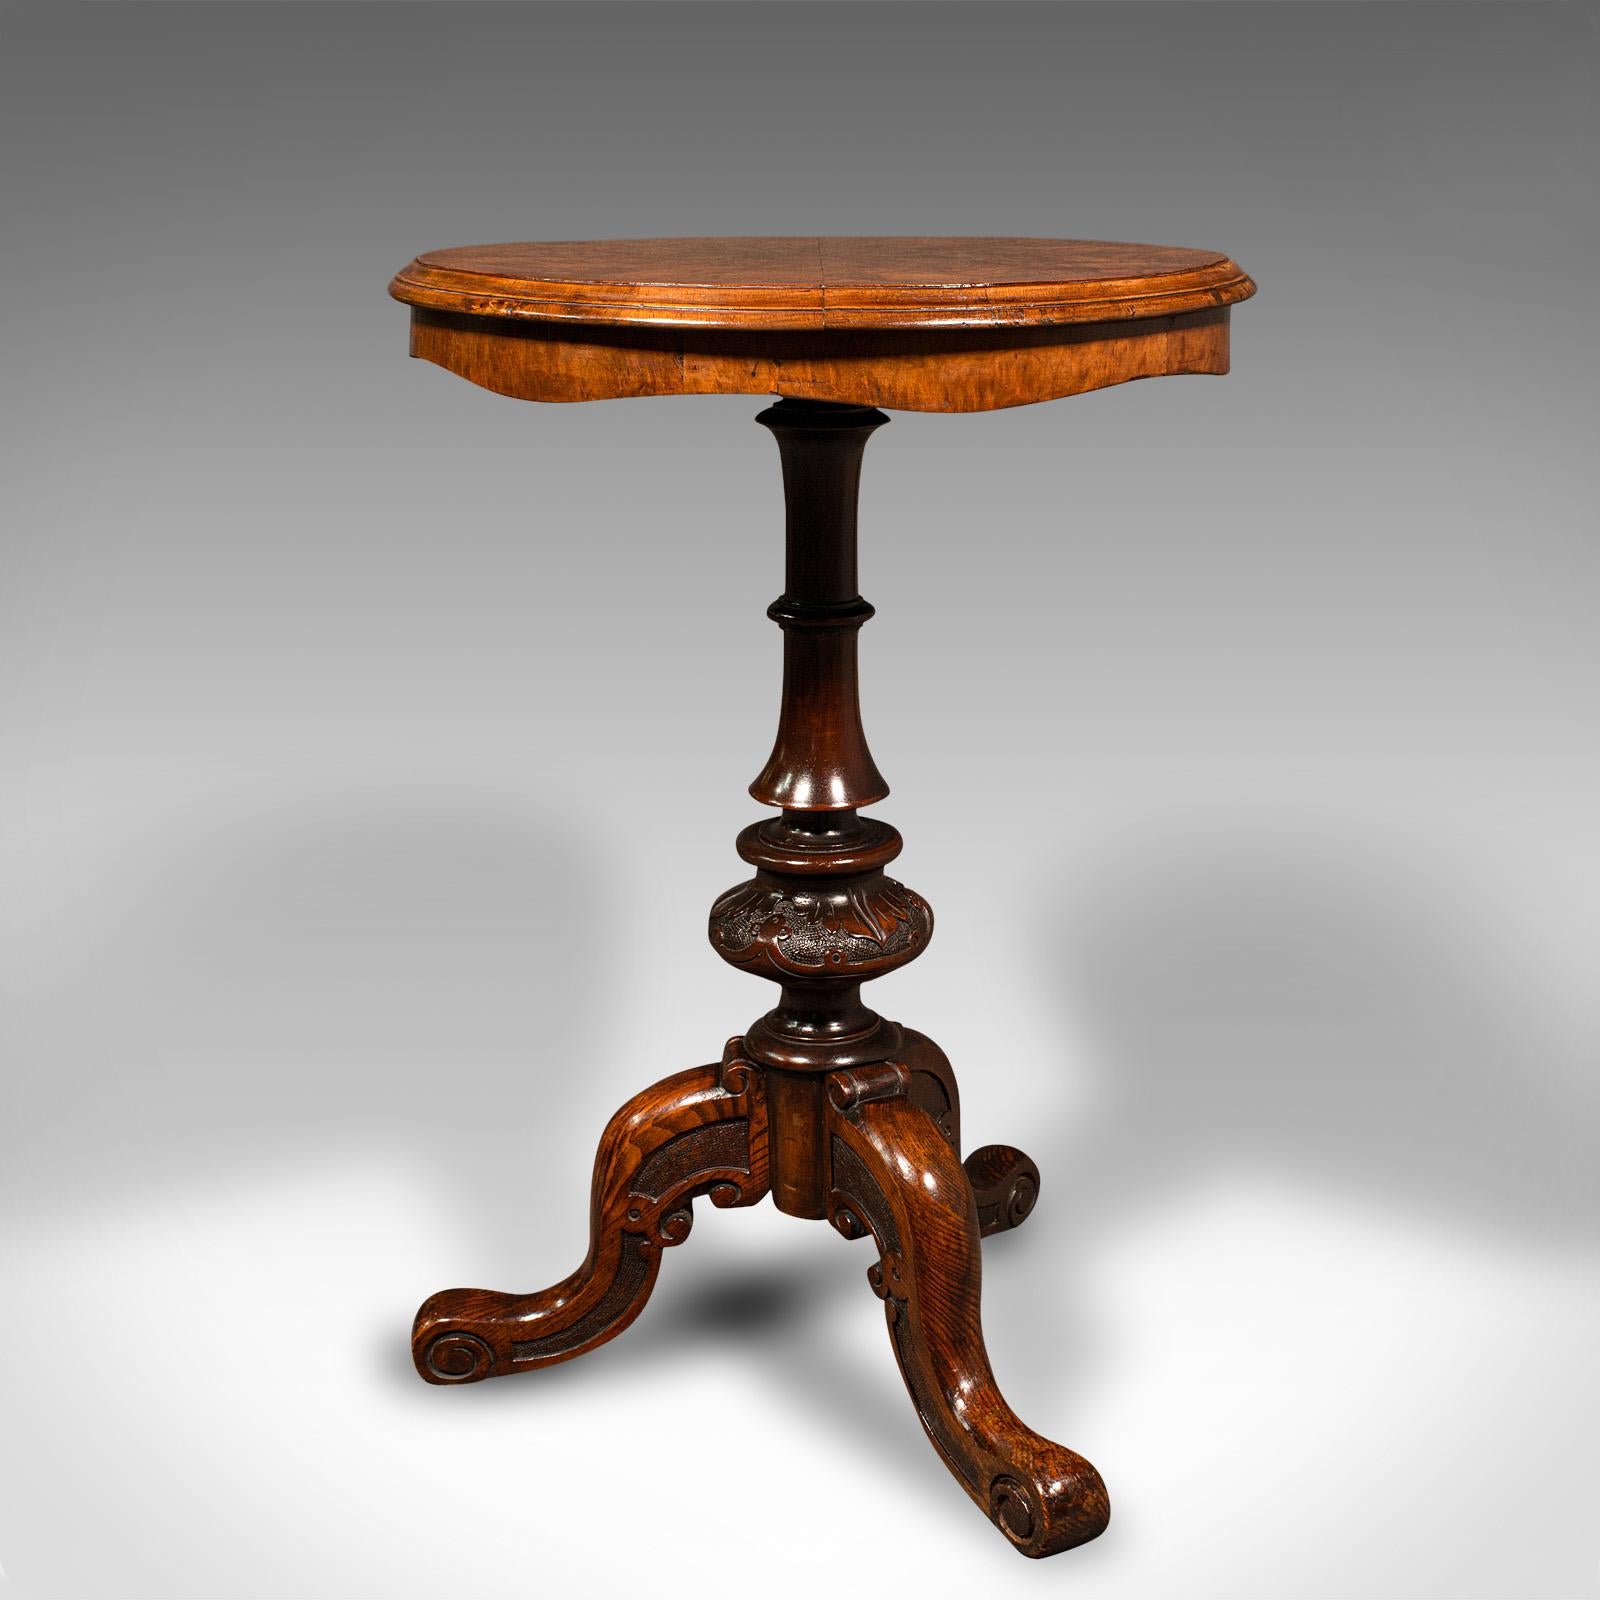 British Antique Lamp Table, English Burr Walnut, Decorative, Occasional, Early Victorian For Sale